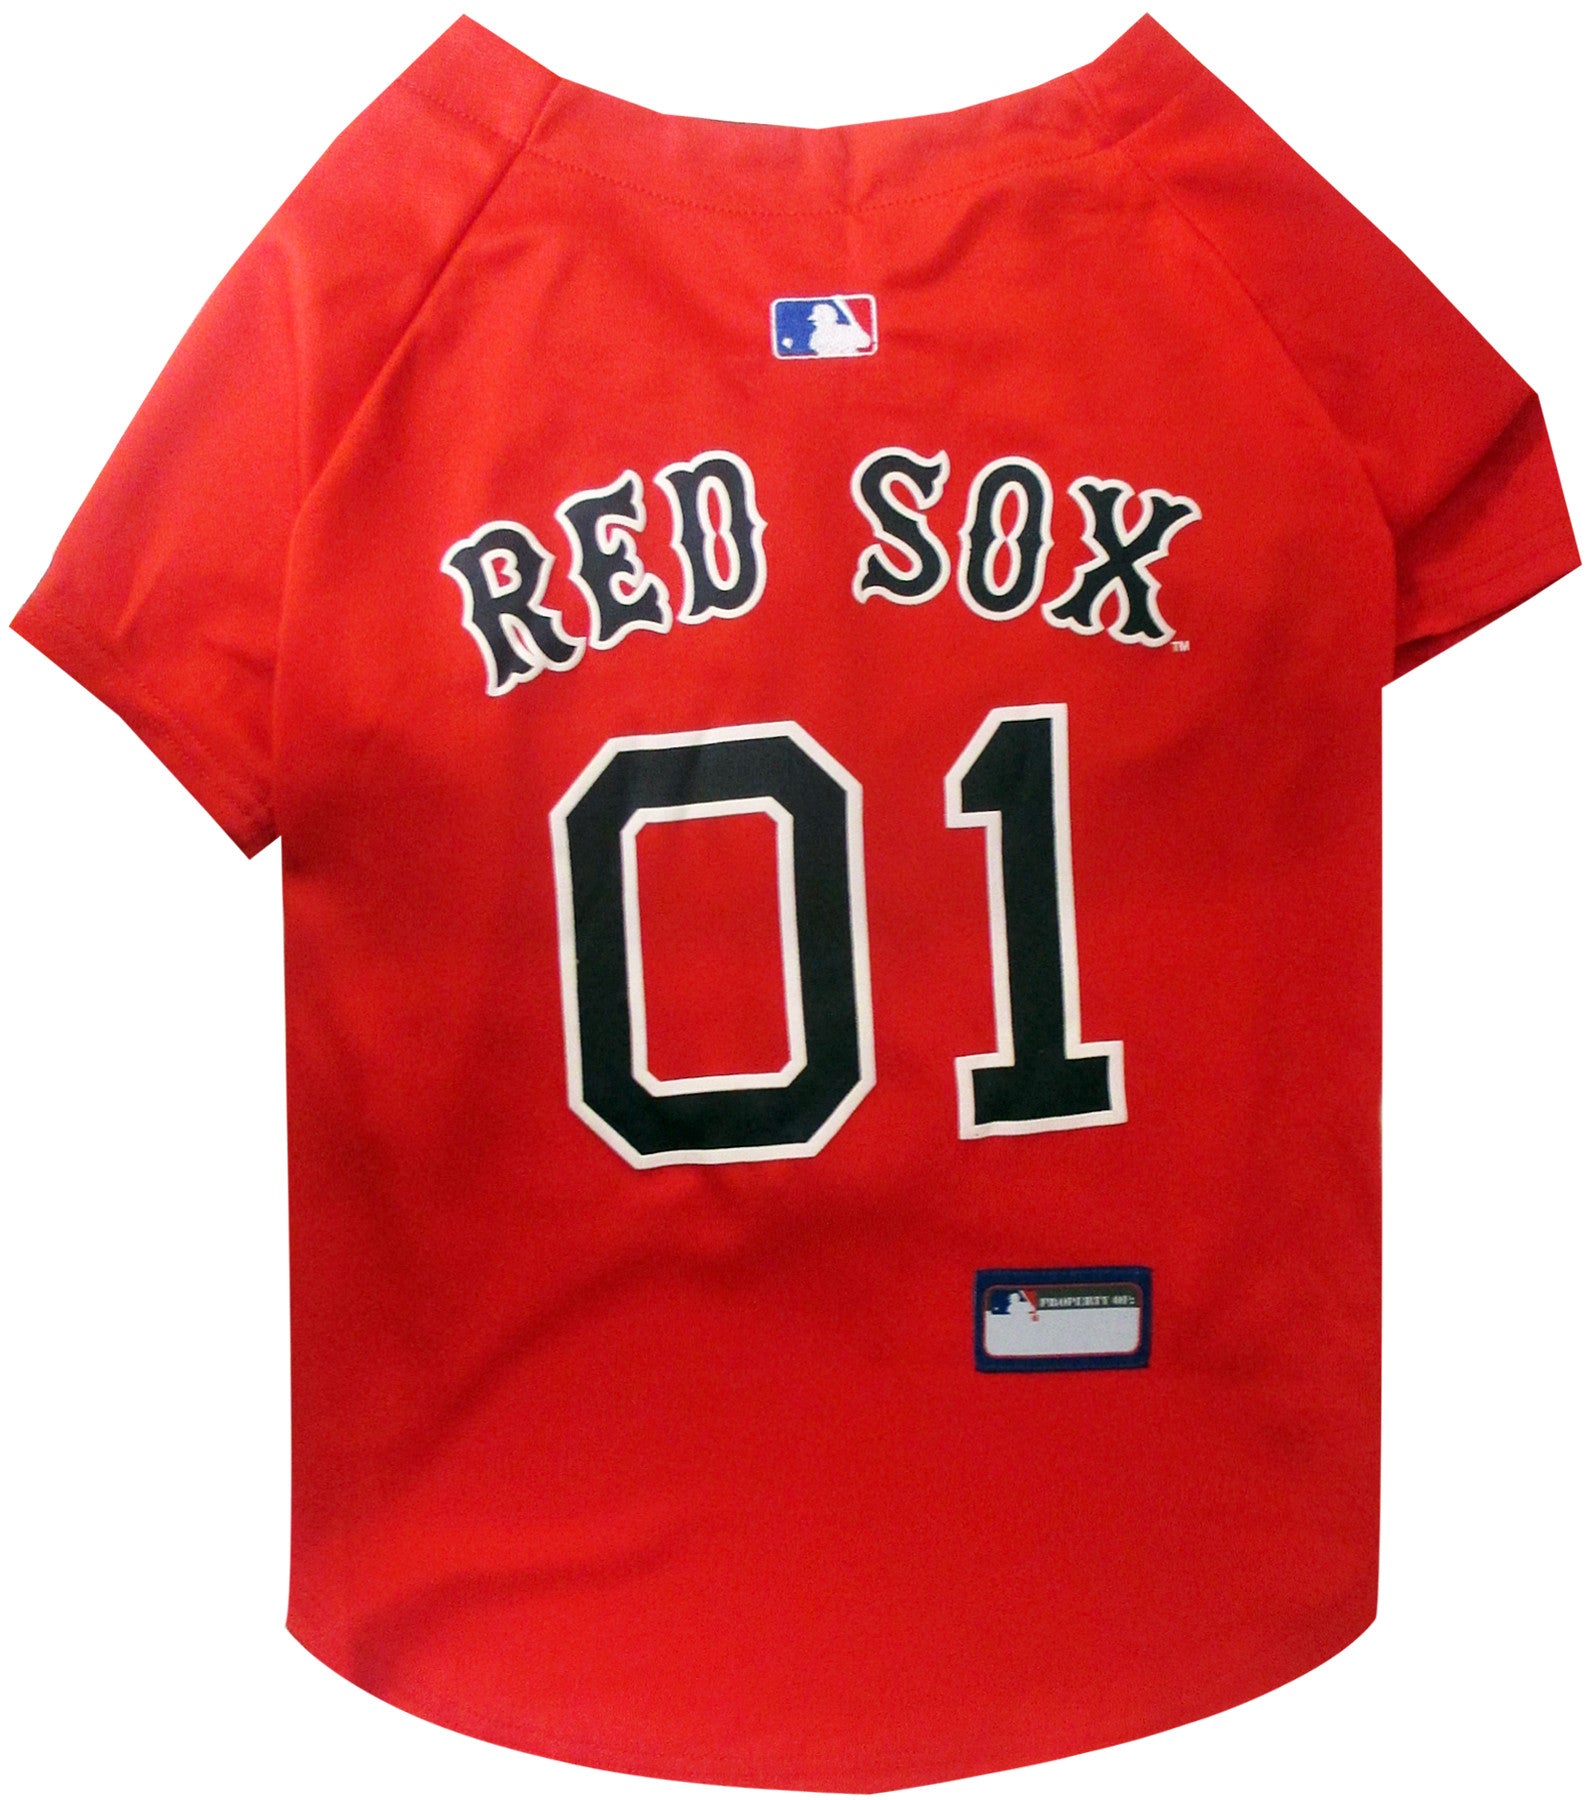 red sox dog jersey